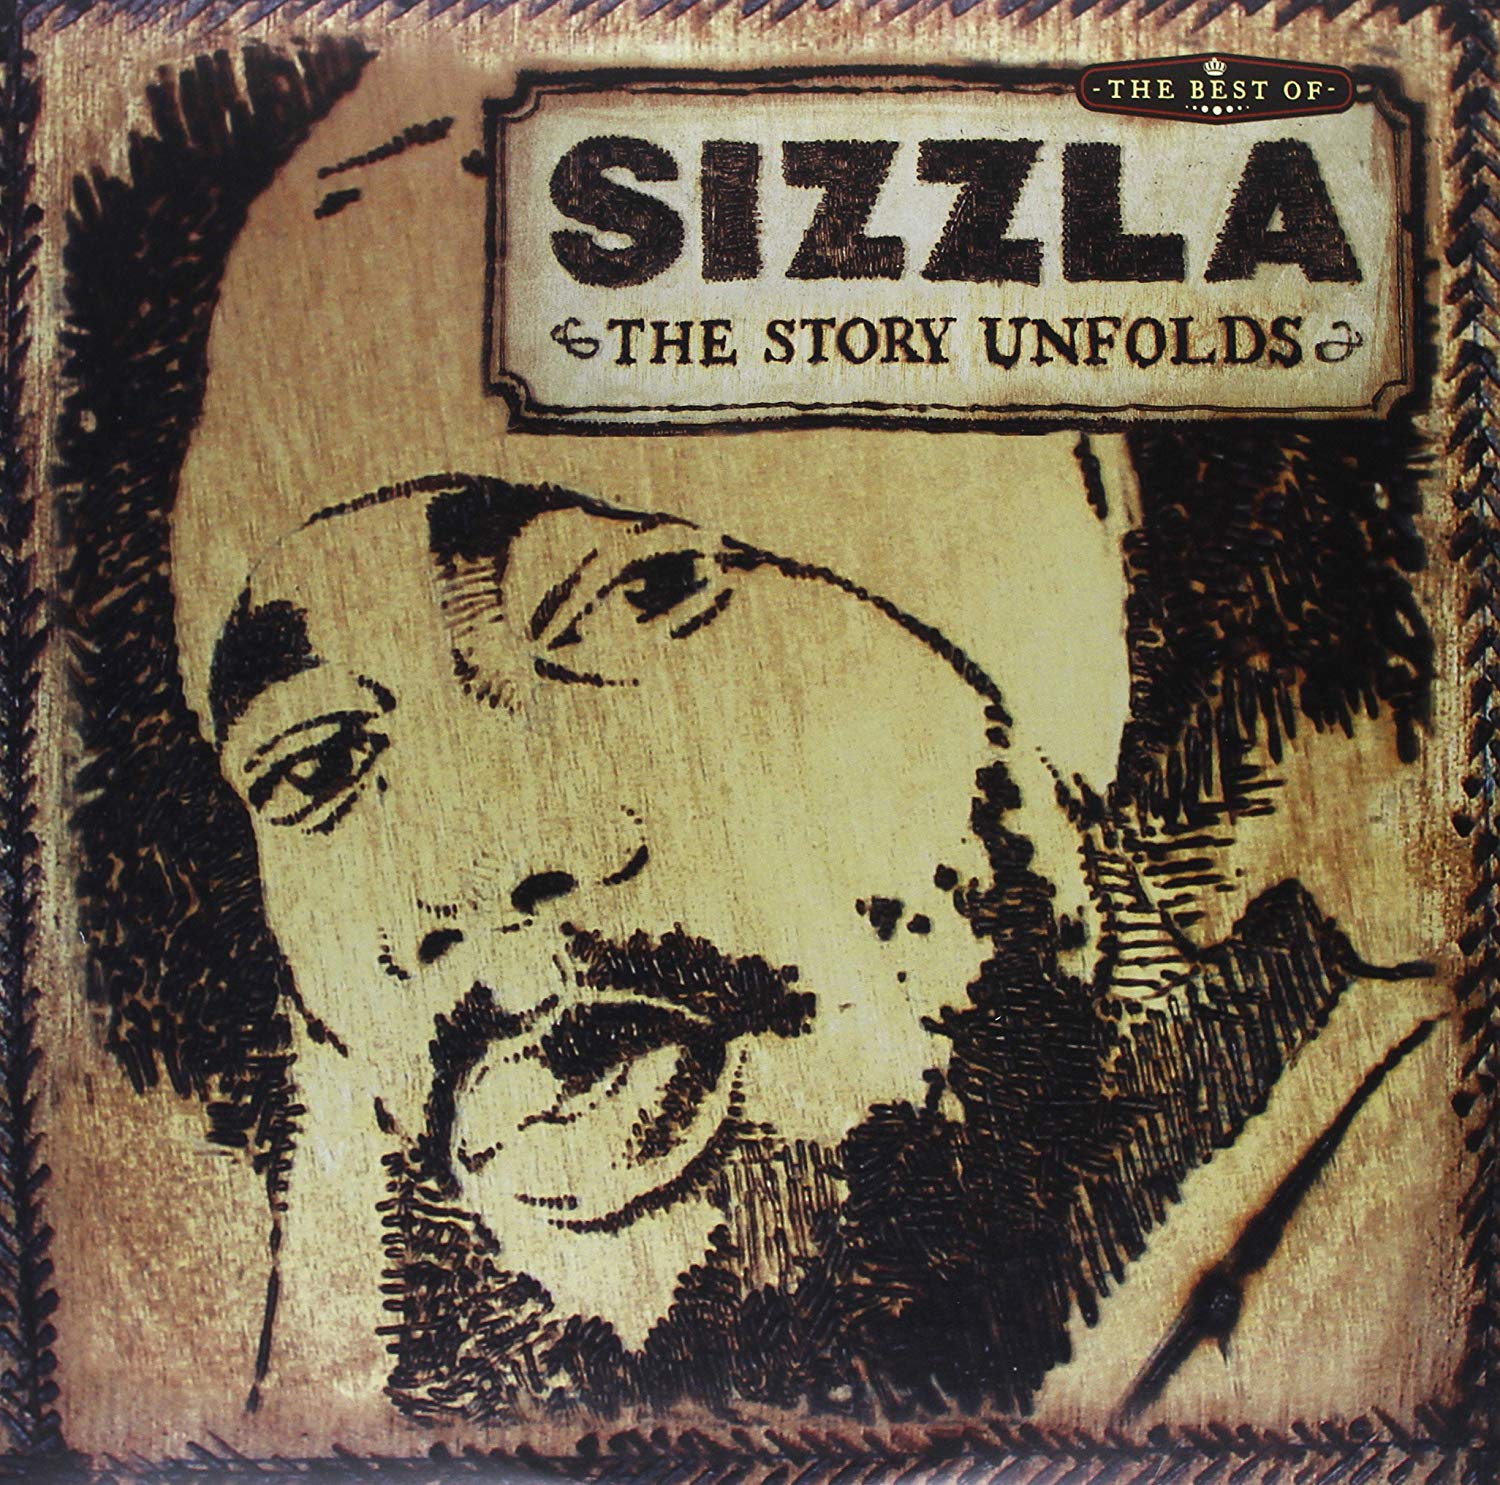 Art for Like Mountain by Sizzla